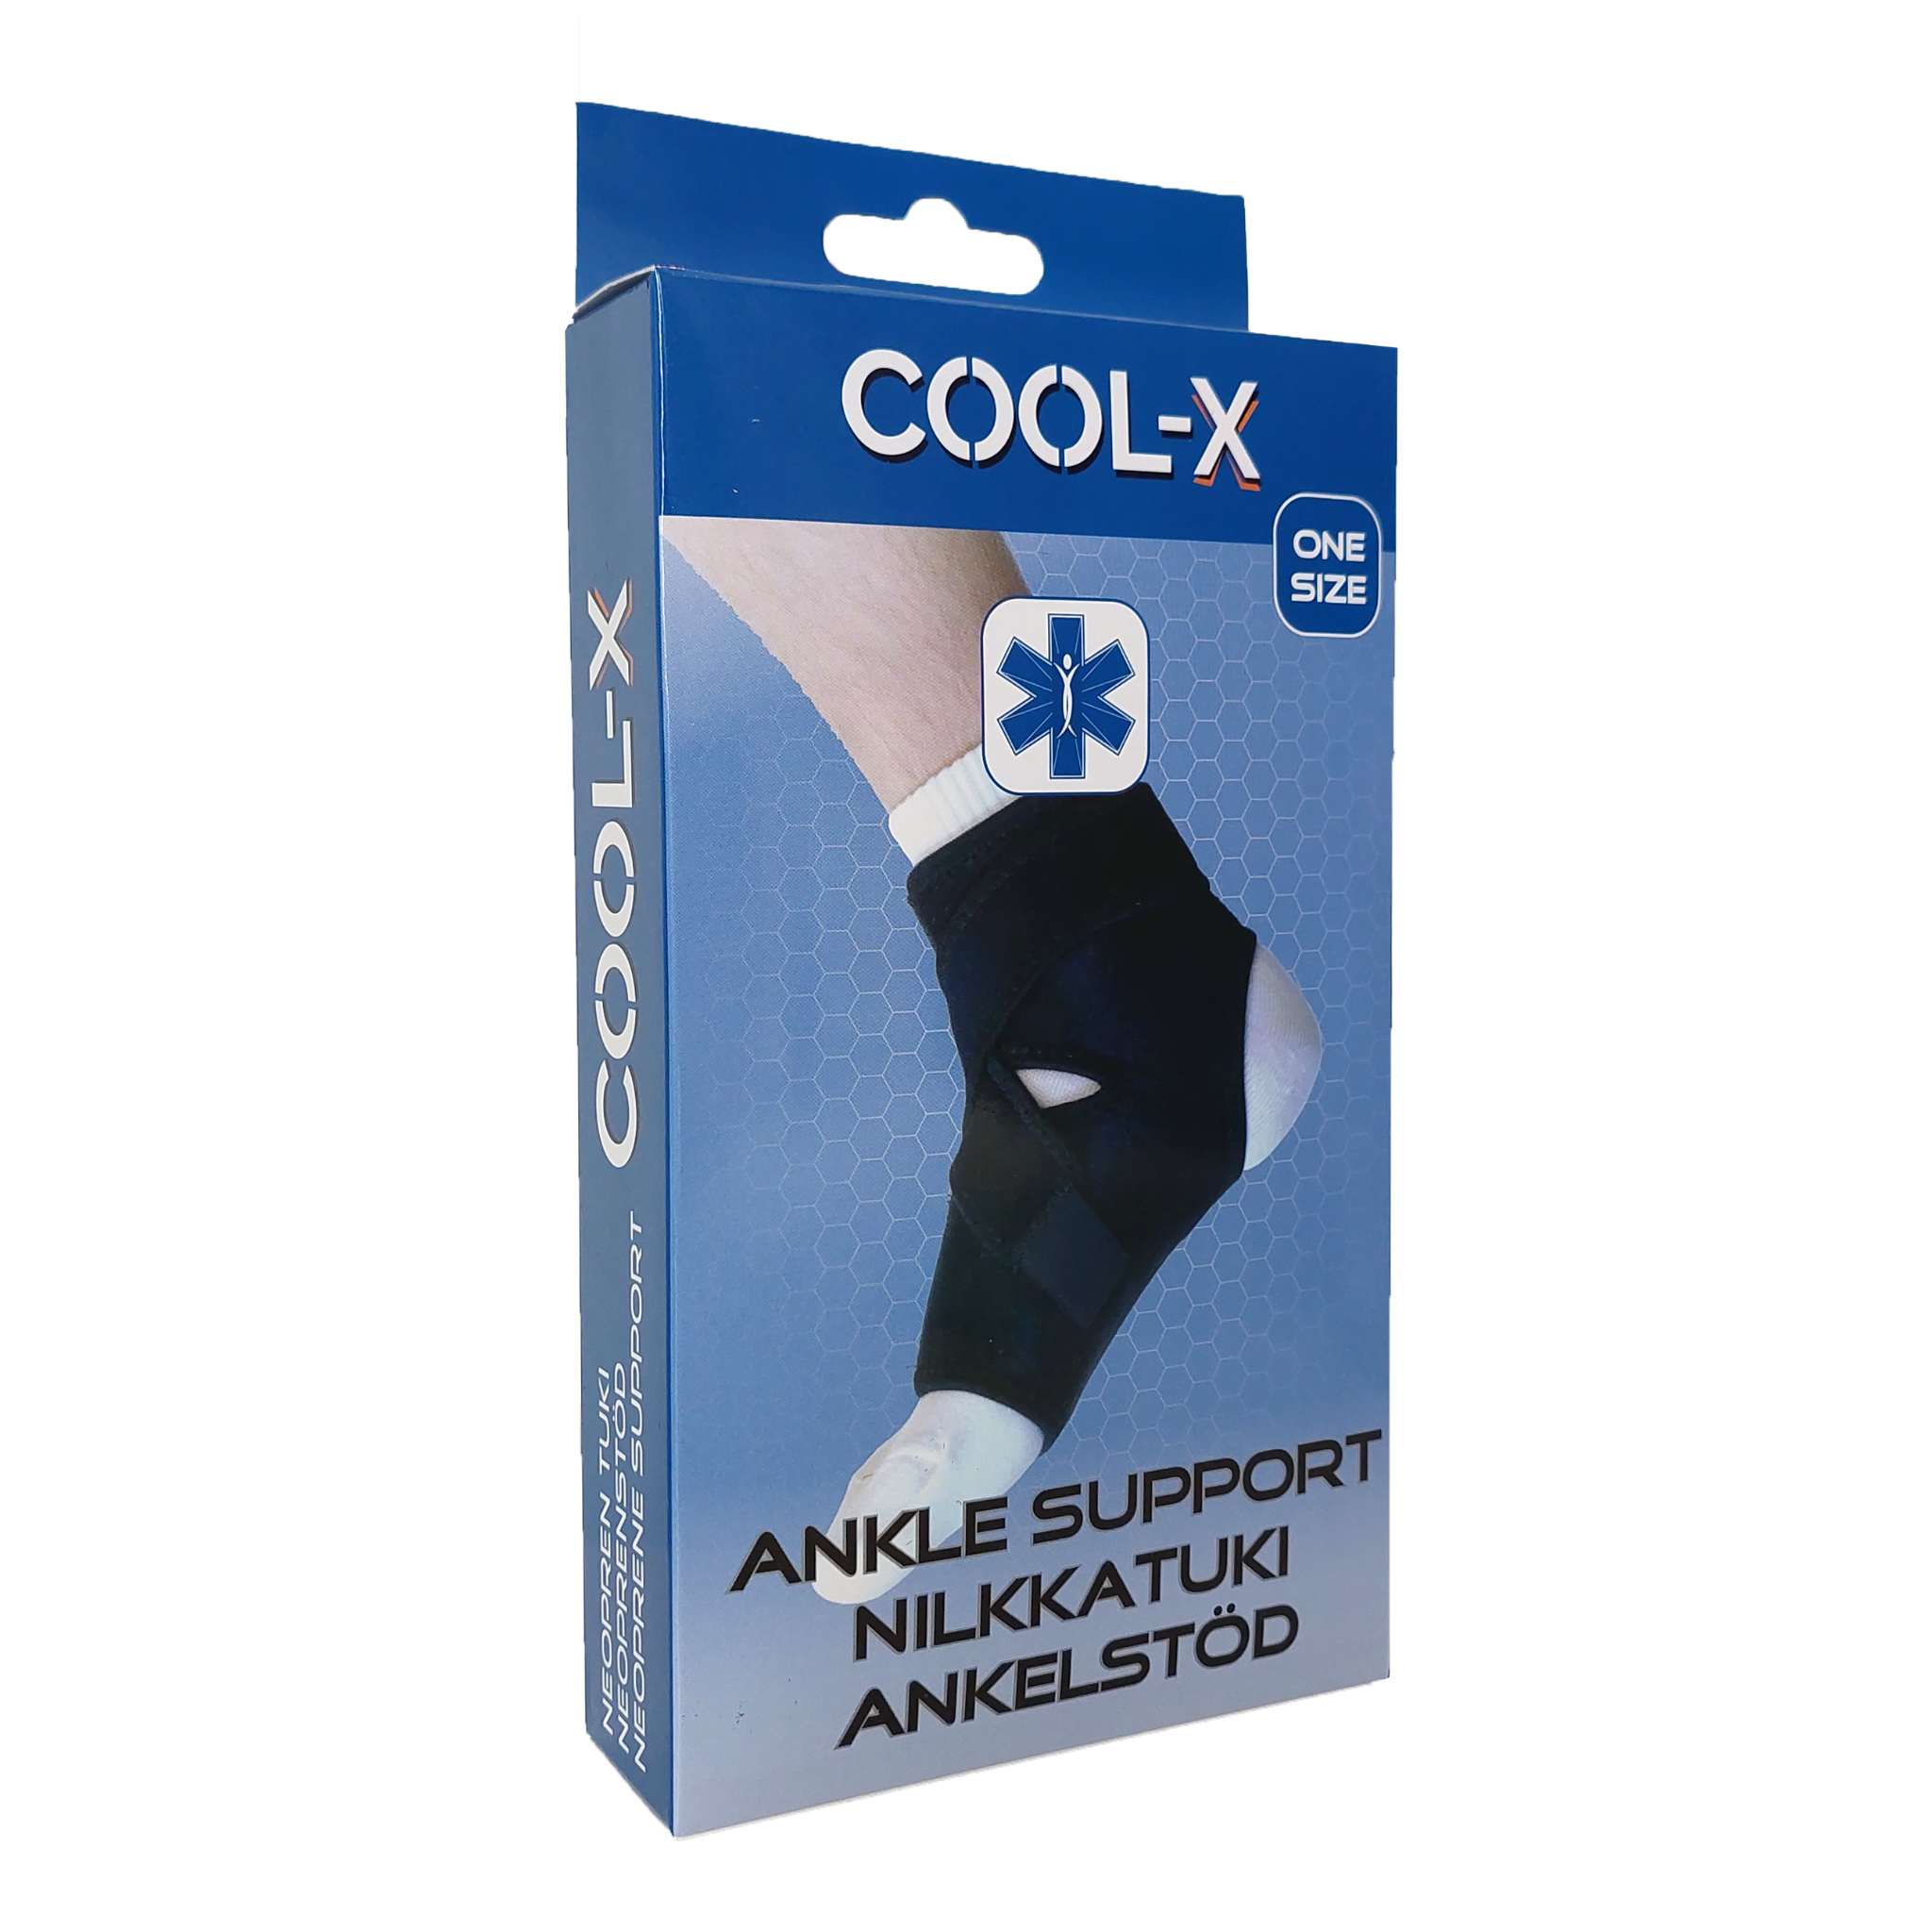 Ankle support with stickers